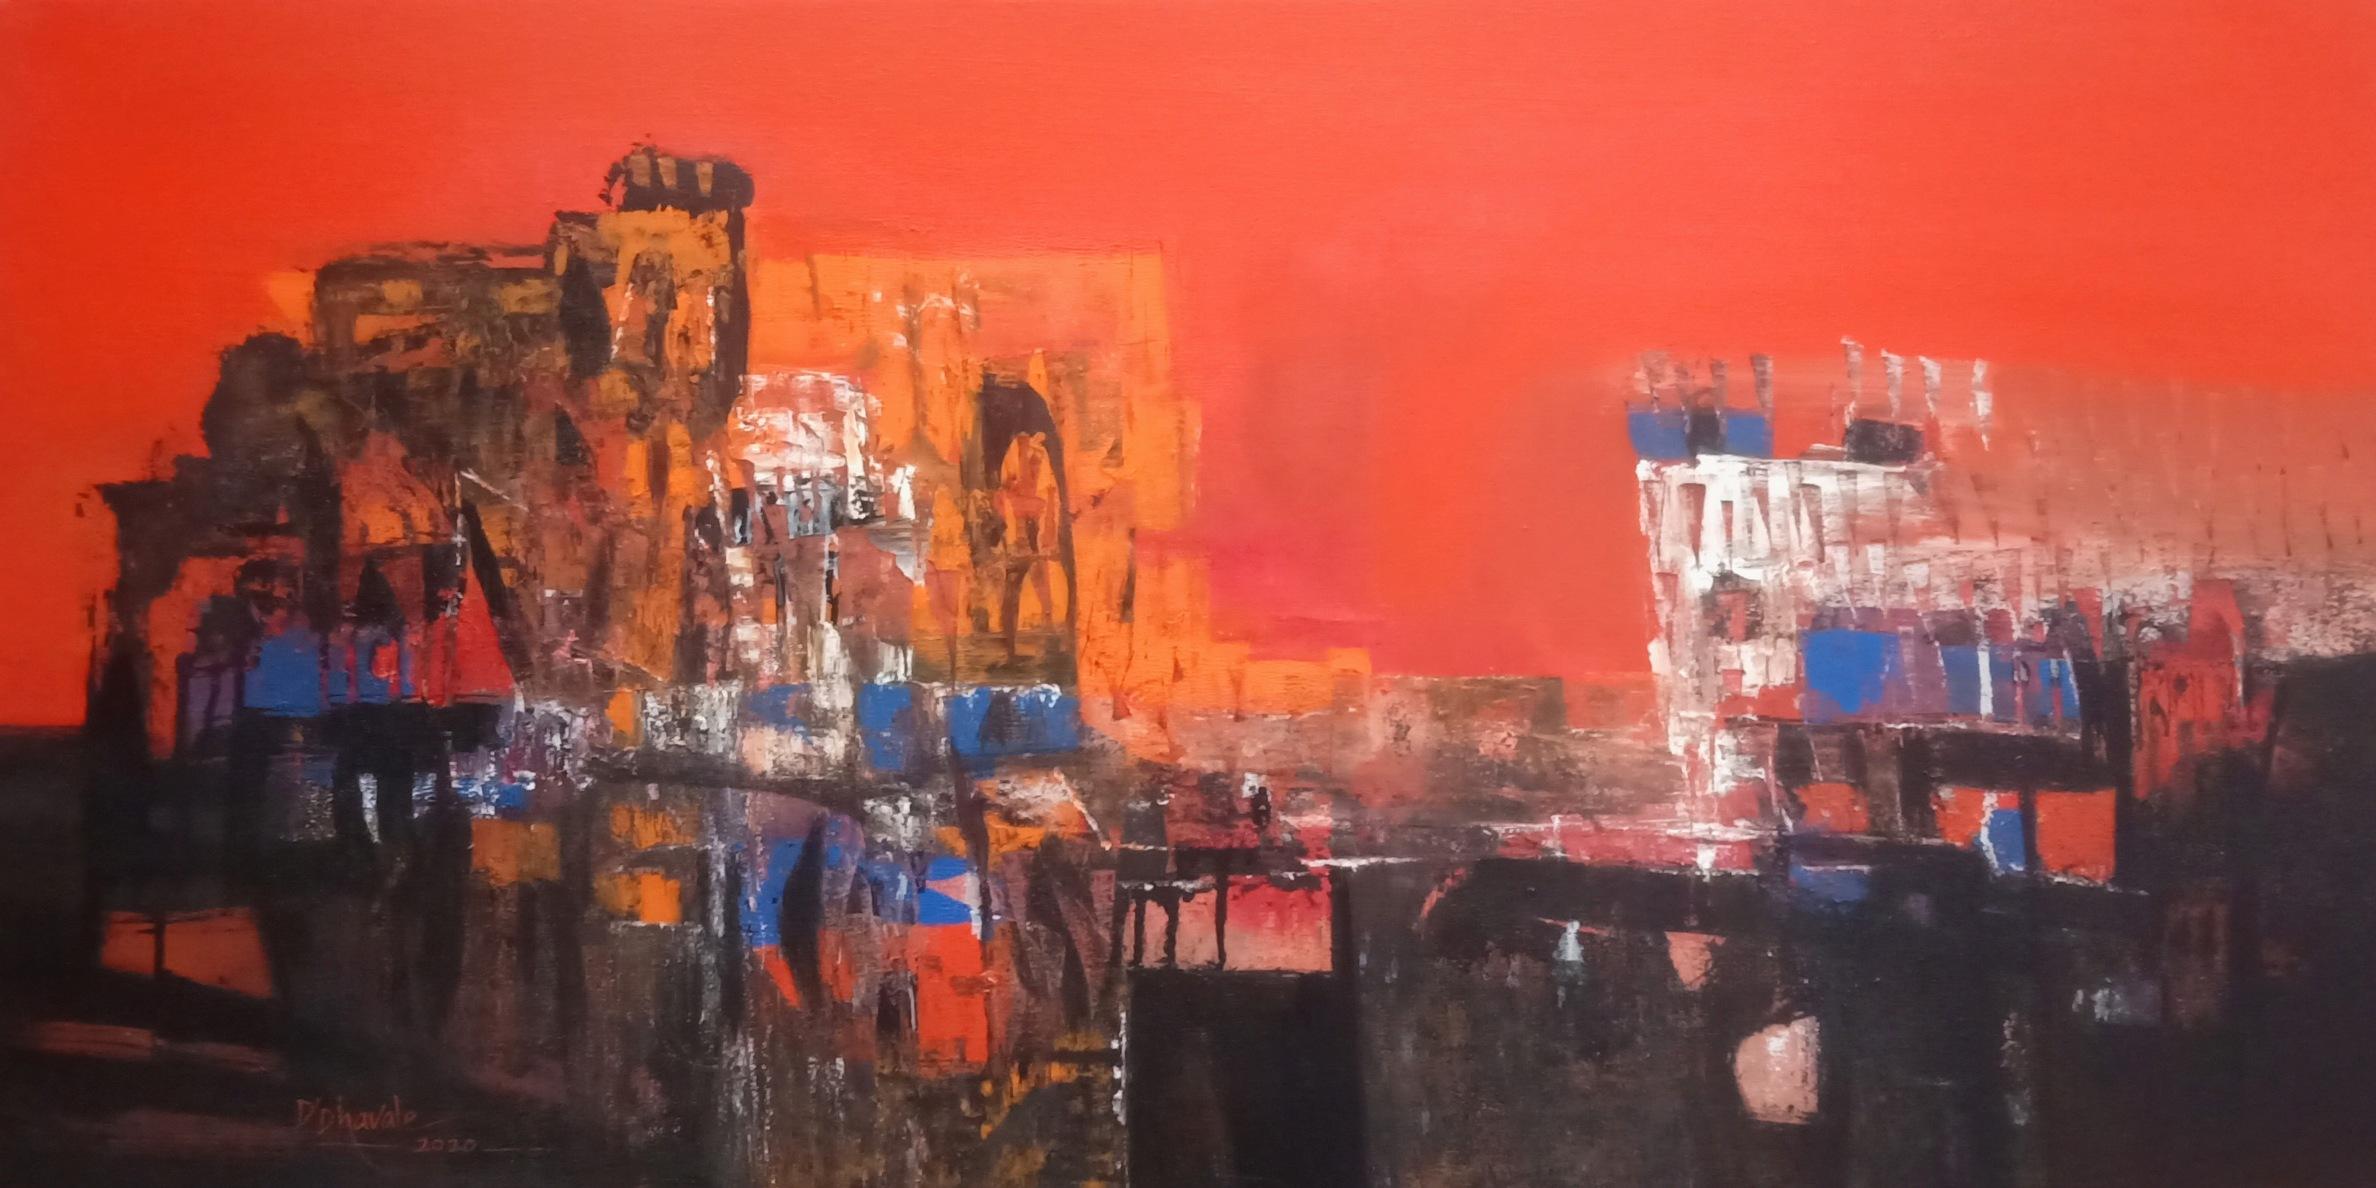 Dnyaneshwar Dhavale Interior Painting - Untitled, Acrylic on Canvas, Orange, Black by Contemporary Artist "In Stock"